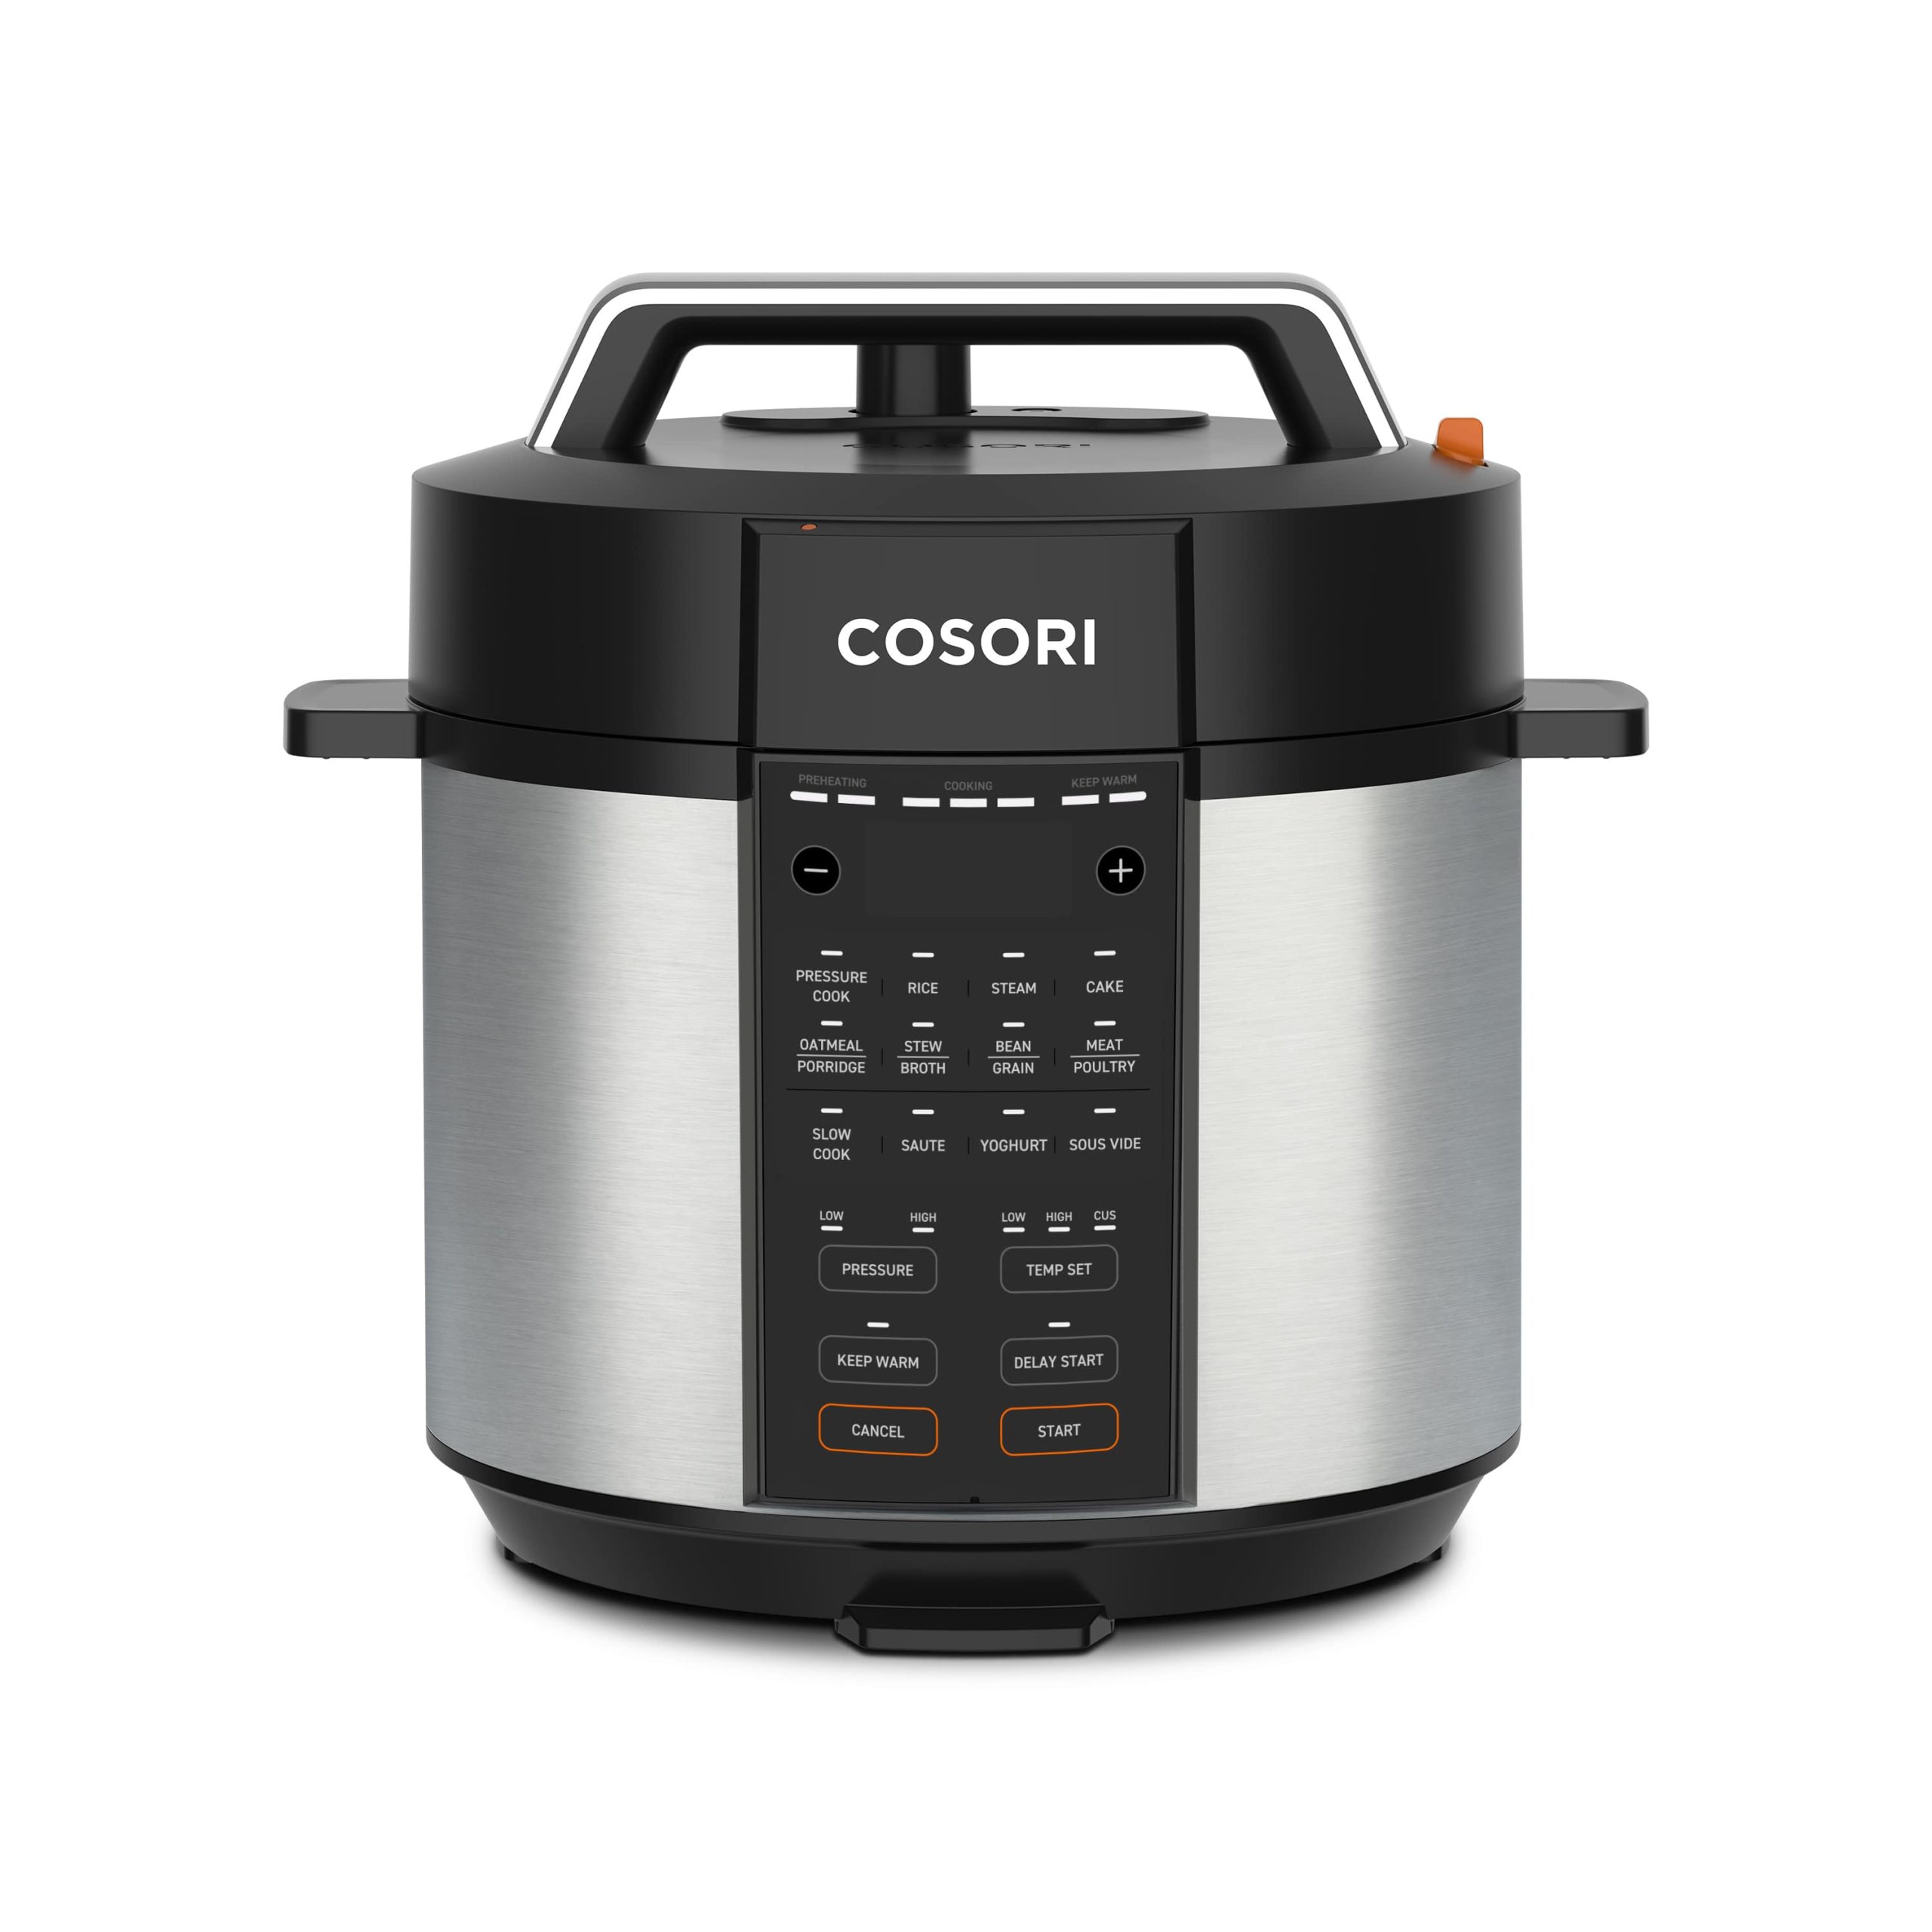 https://usercontent.one/wp/www.cosorishop.co.uk/wp-content/uploads/2023/10/cosori-pressure-cooker-product-scaled.jpg?media=1700233277